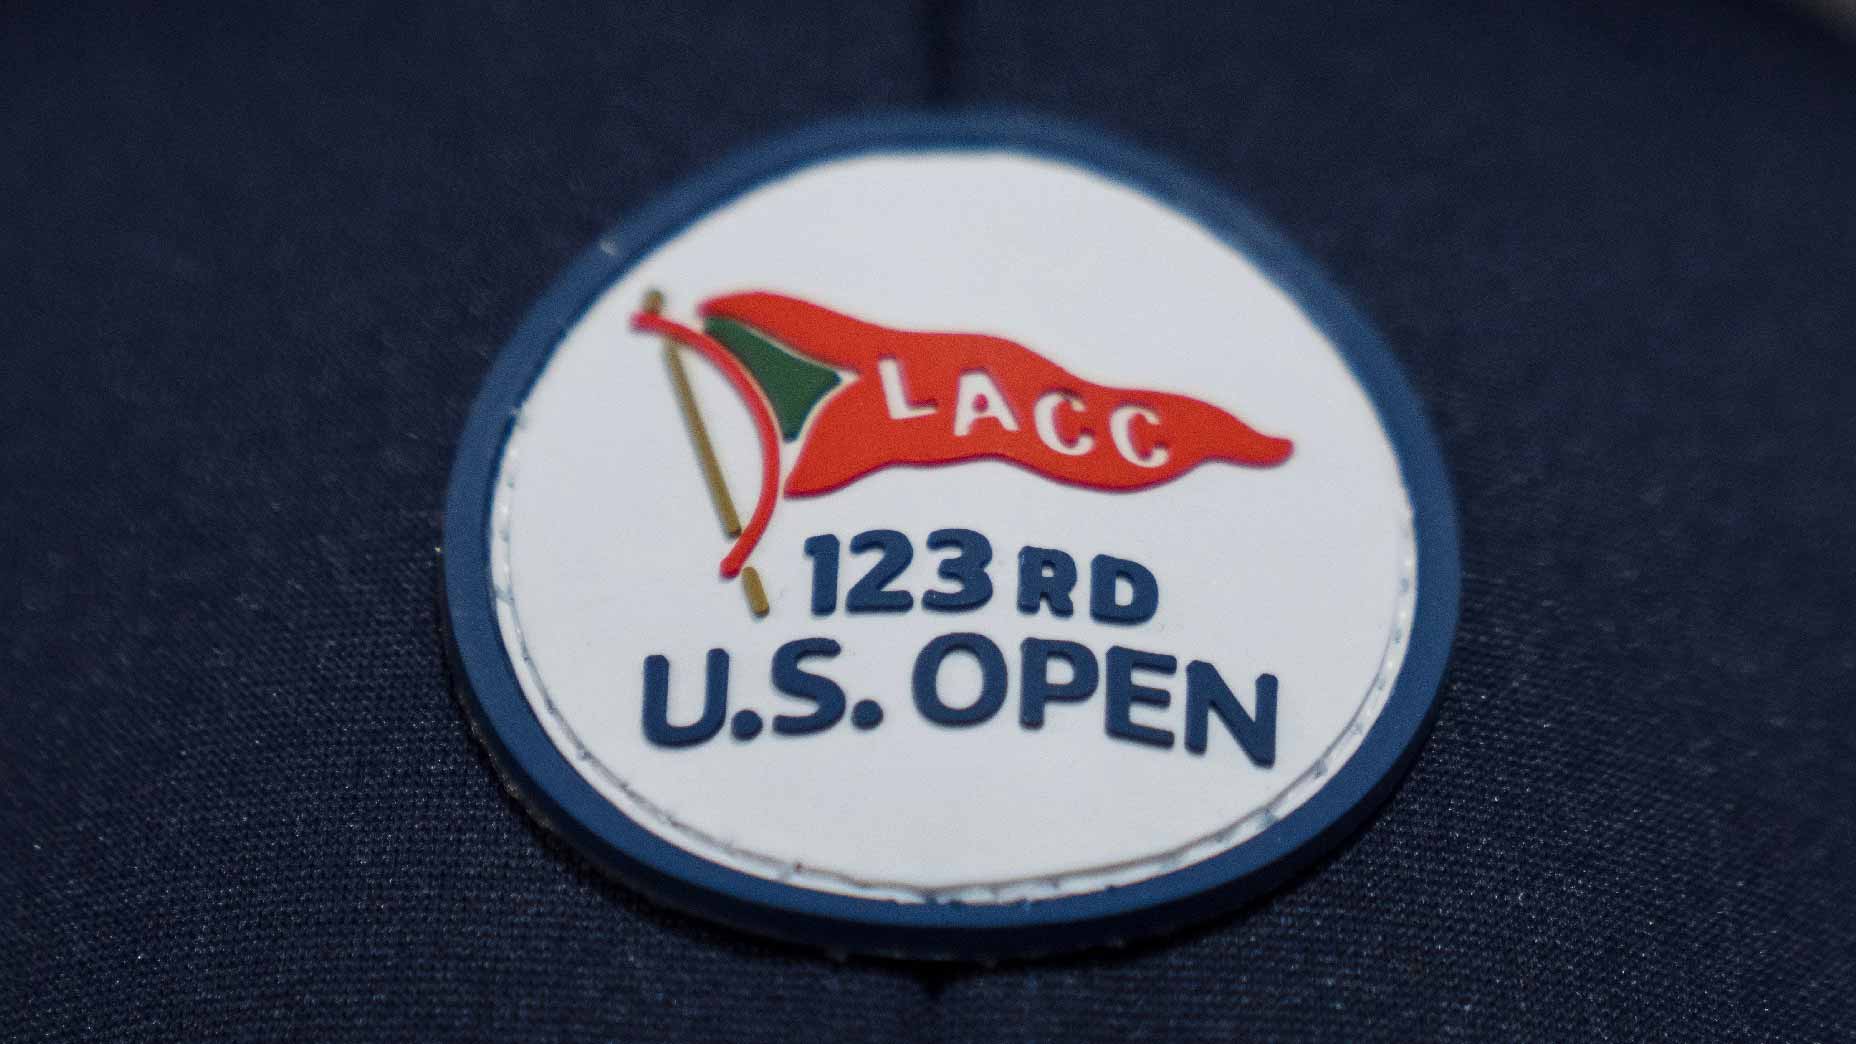 channel is the us open on